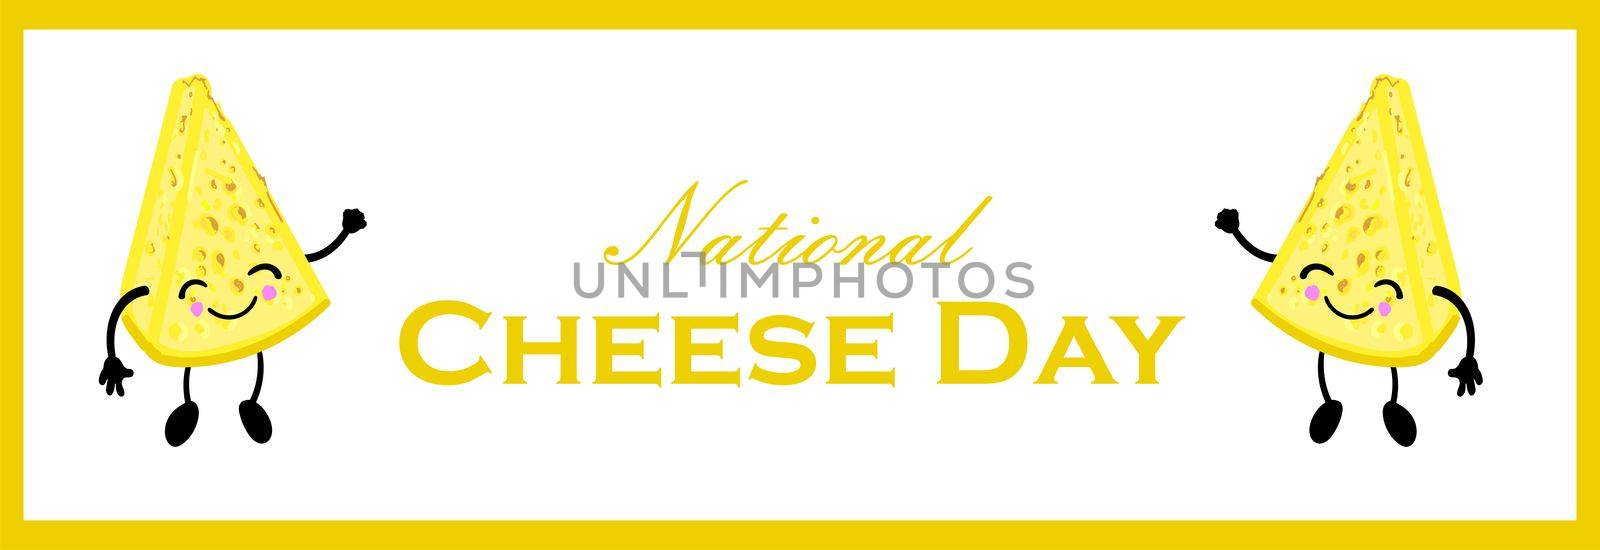 National Cheese Day. Postcard or banner for International Cheese Day. Cute cartoon cheesy character. Cheese with a face and a smile. Dairy.. by annatarankova